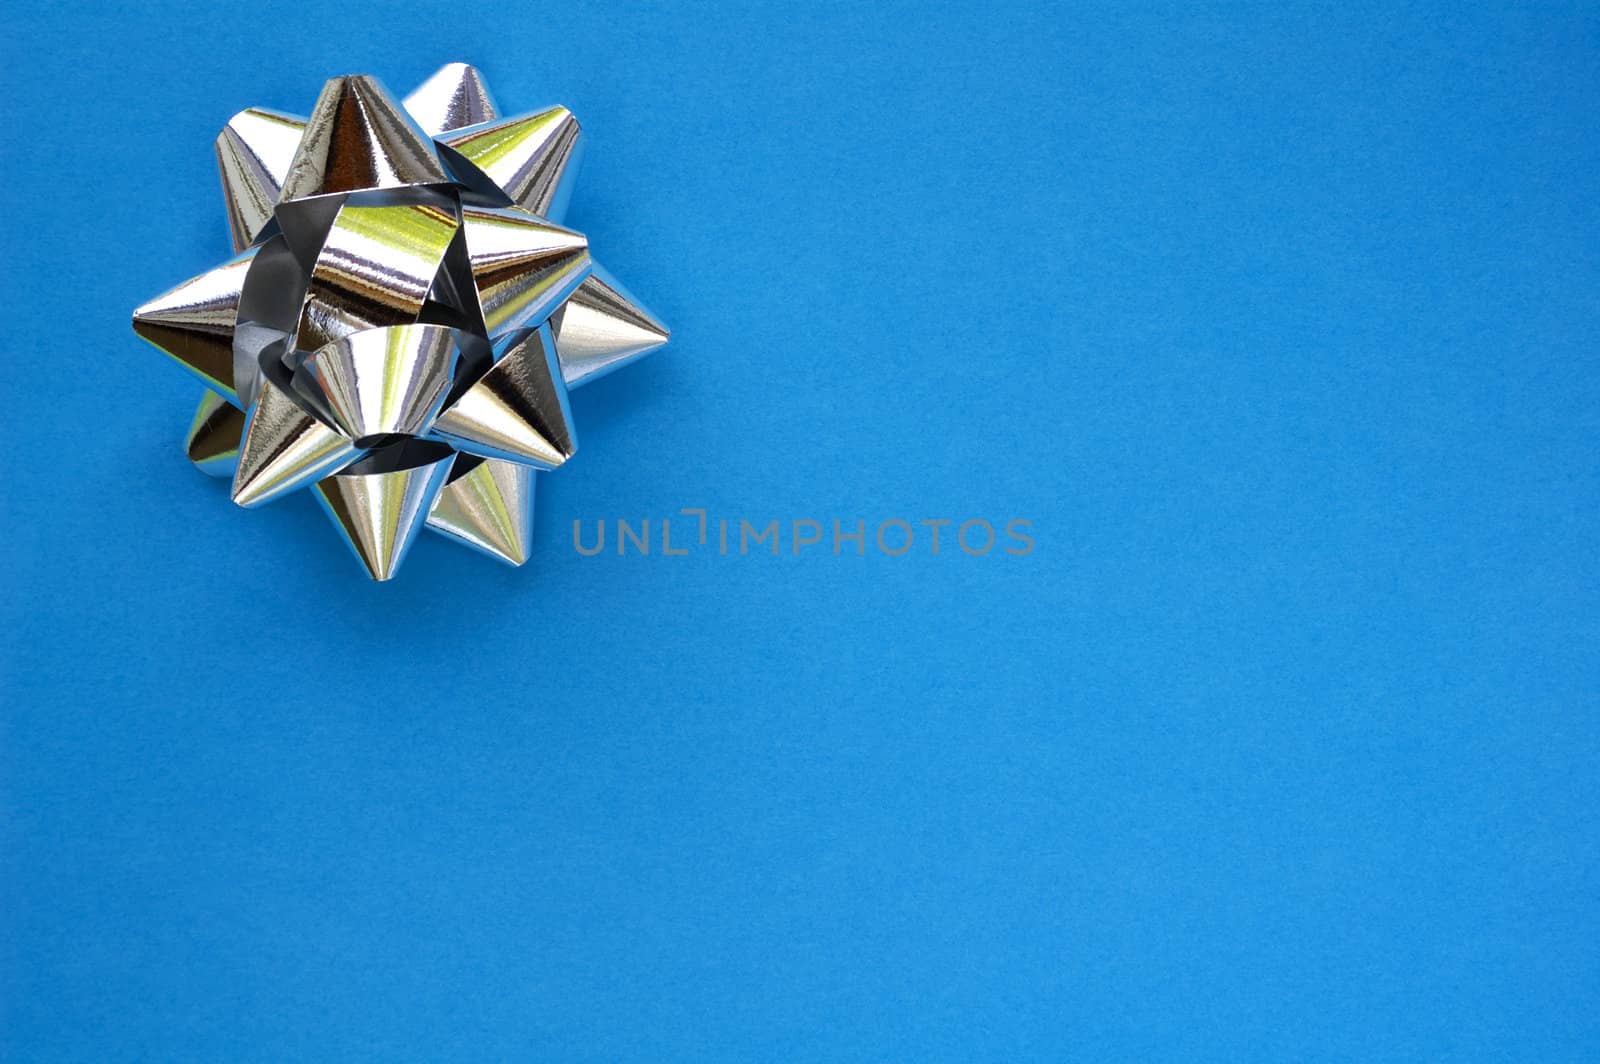 A decorative star, made from silver ribbon, on a plain blue background with space for text (copy).